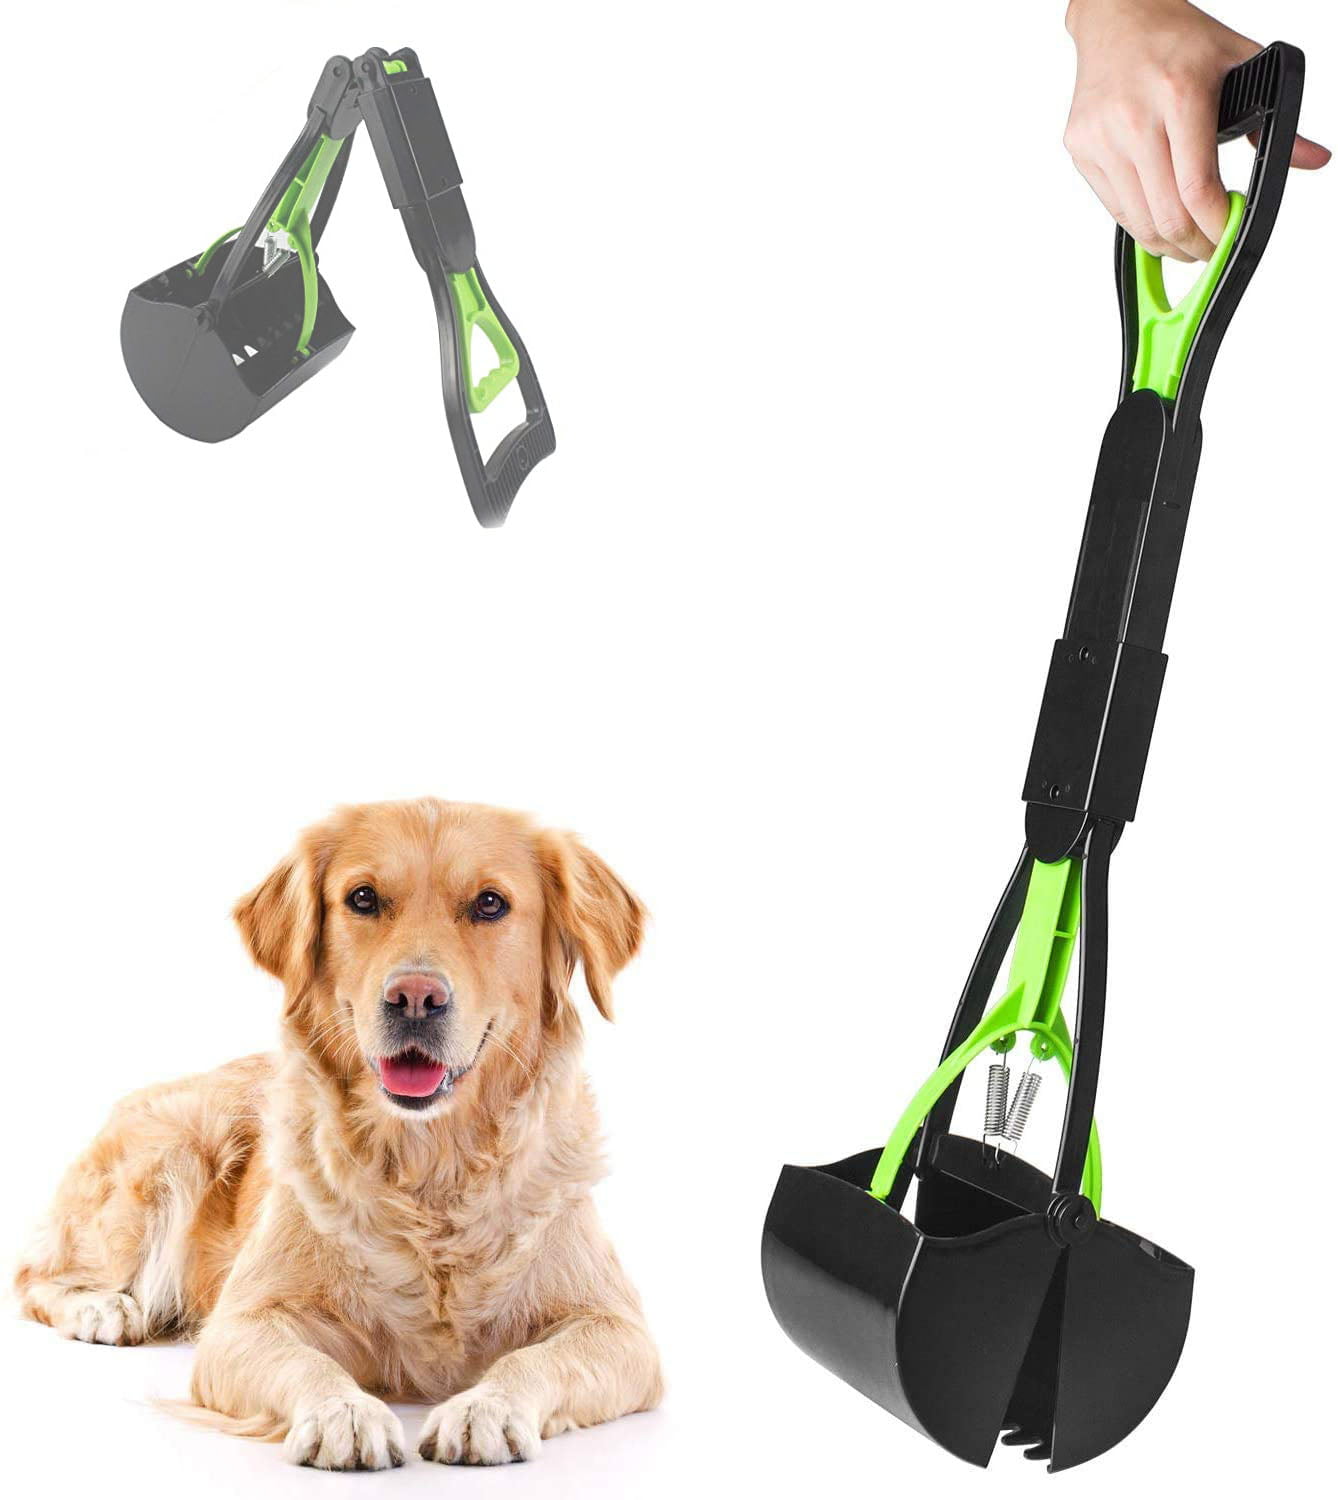 SCPET Pet Pooper Scooper for Dogs and Cats with Long Handle Foldable Dog Poop Waste Pick Up Rake Jaw Claw Bin for Grass and Gravel 